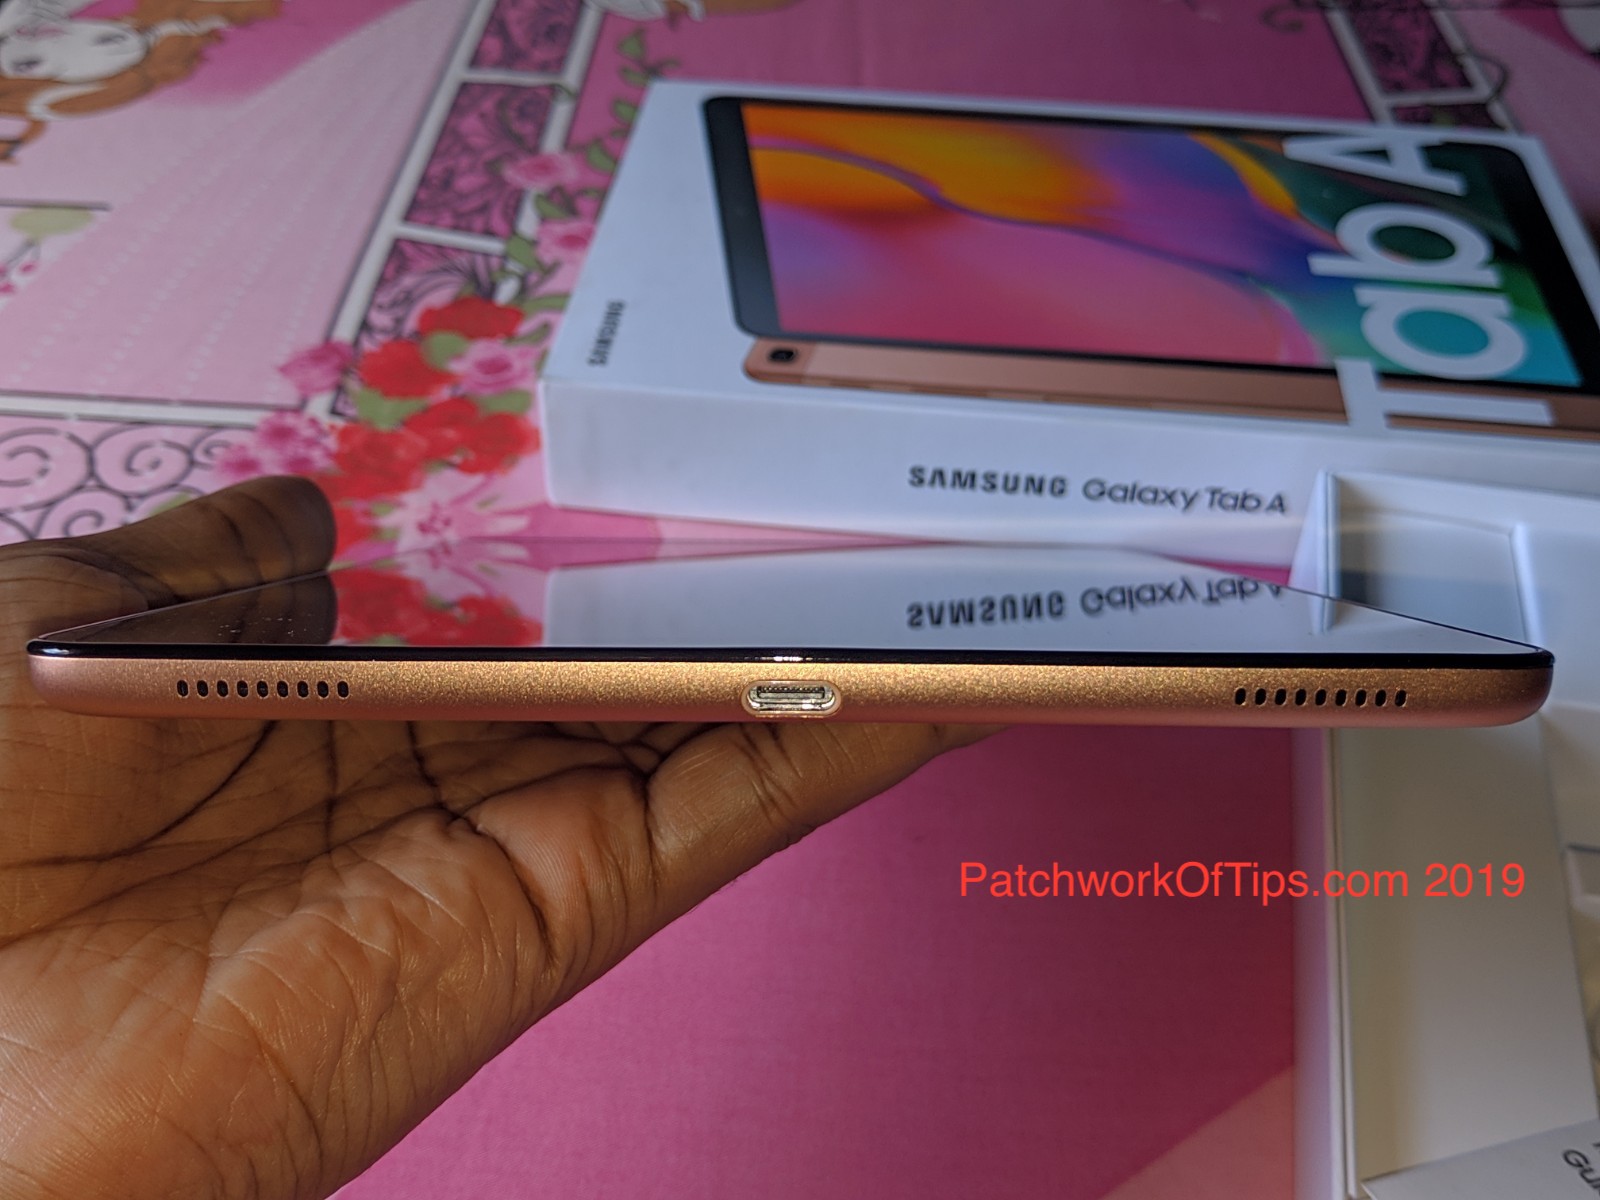 Samsung Galaxy Tab A 10.1 21019 USB Type C Charging Port and Dual Speakers